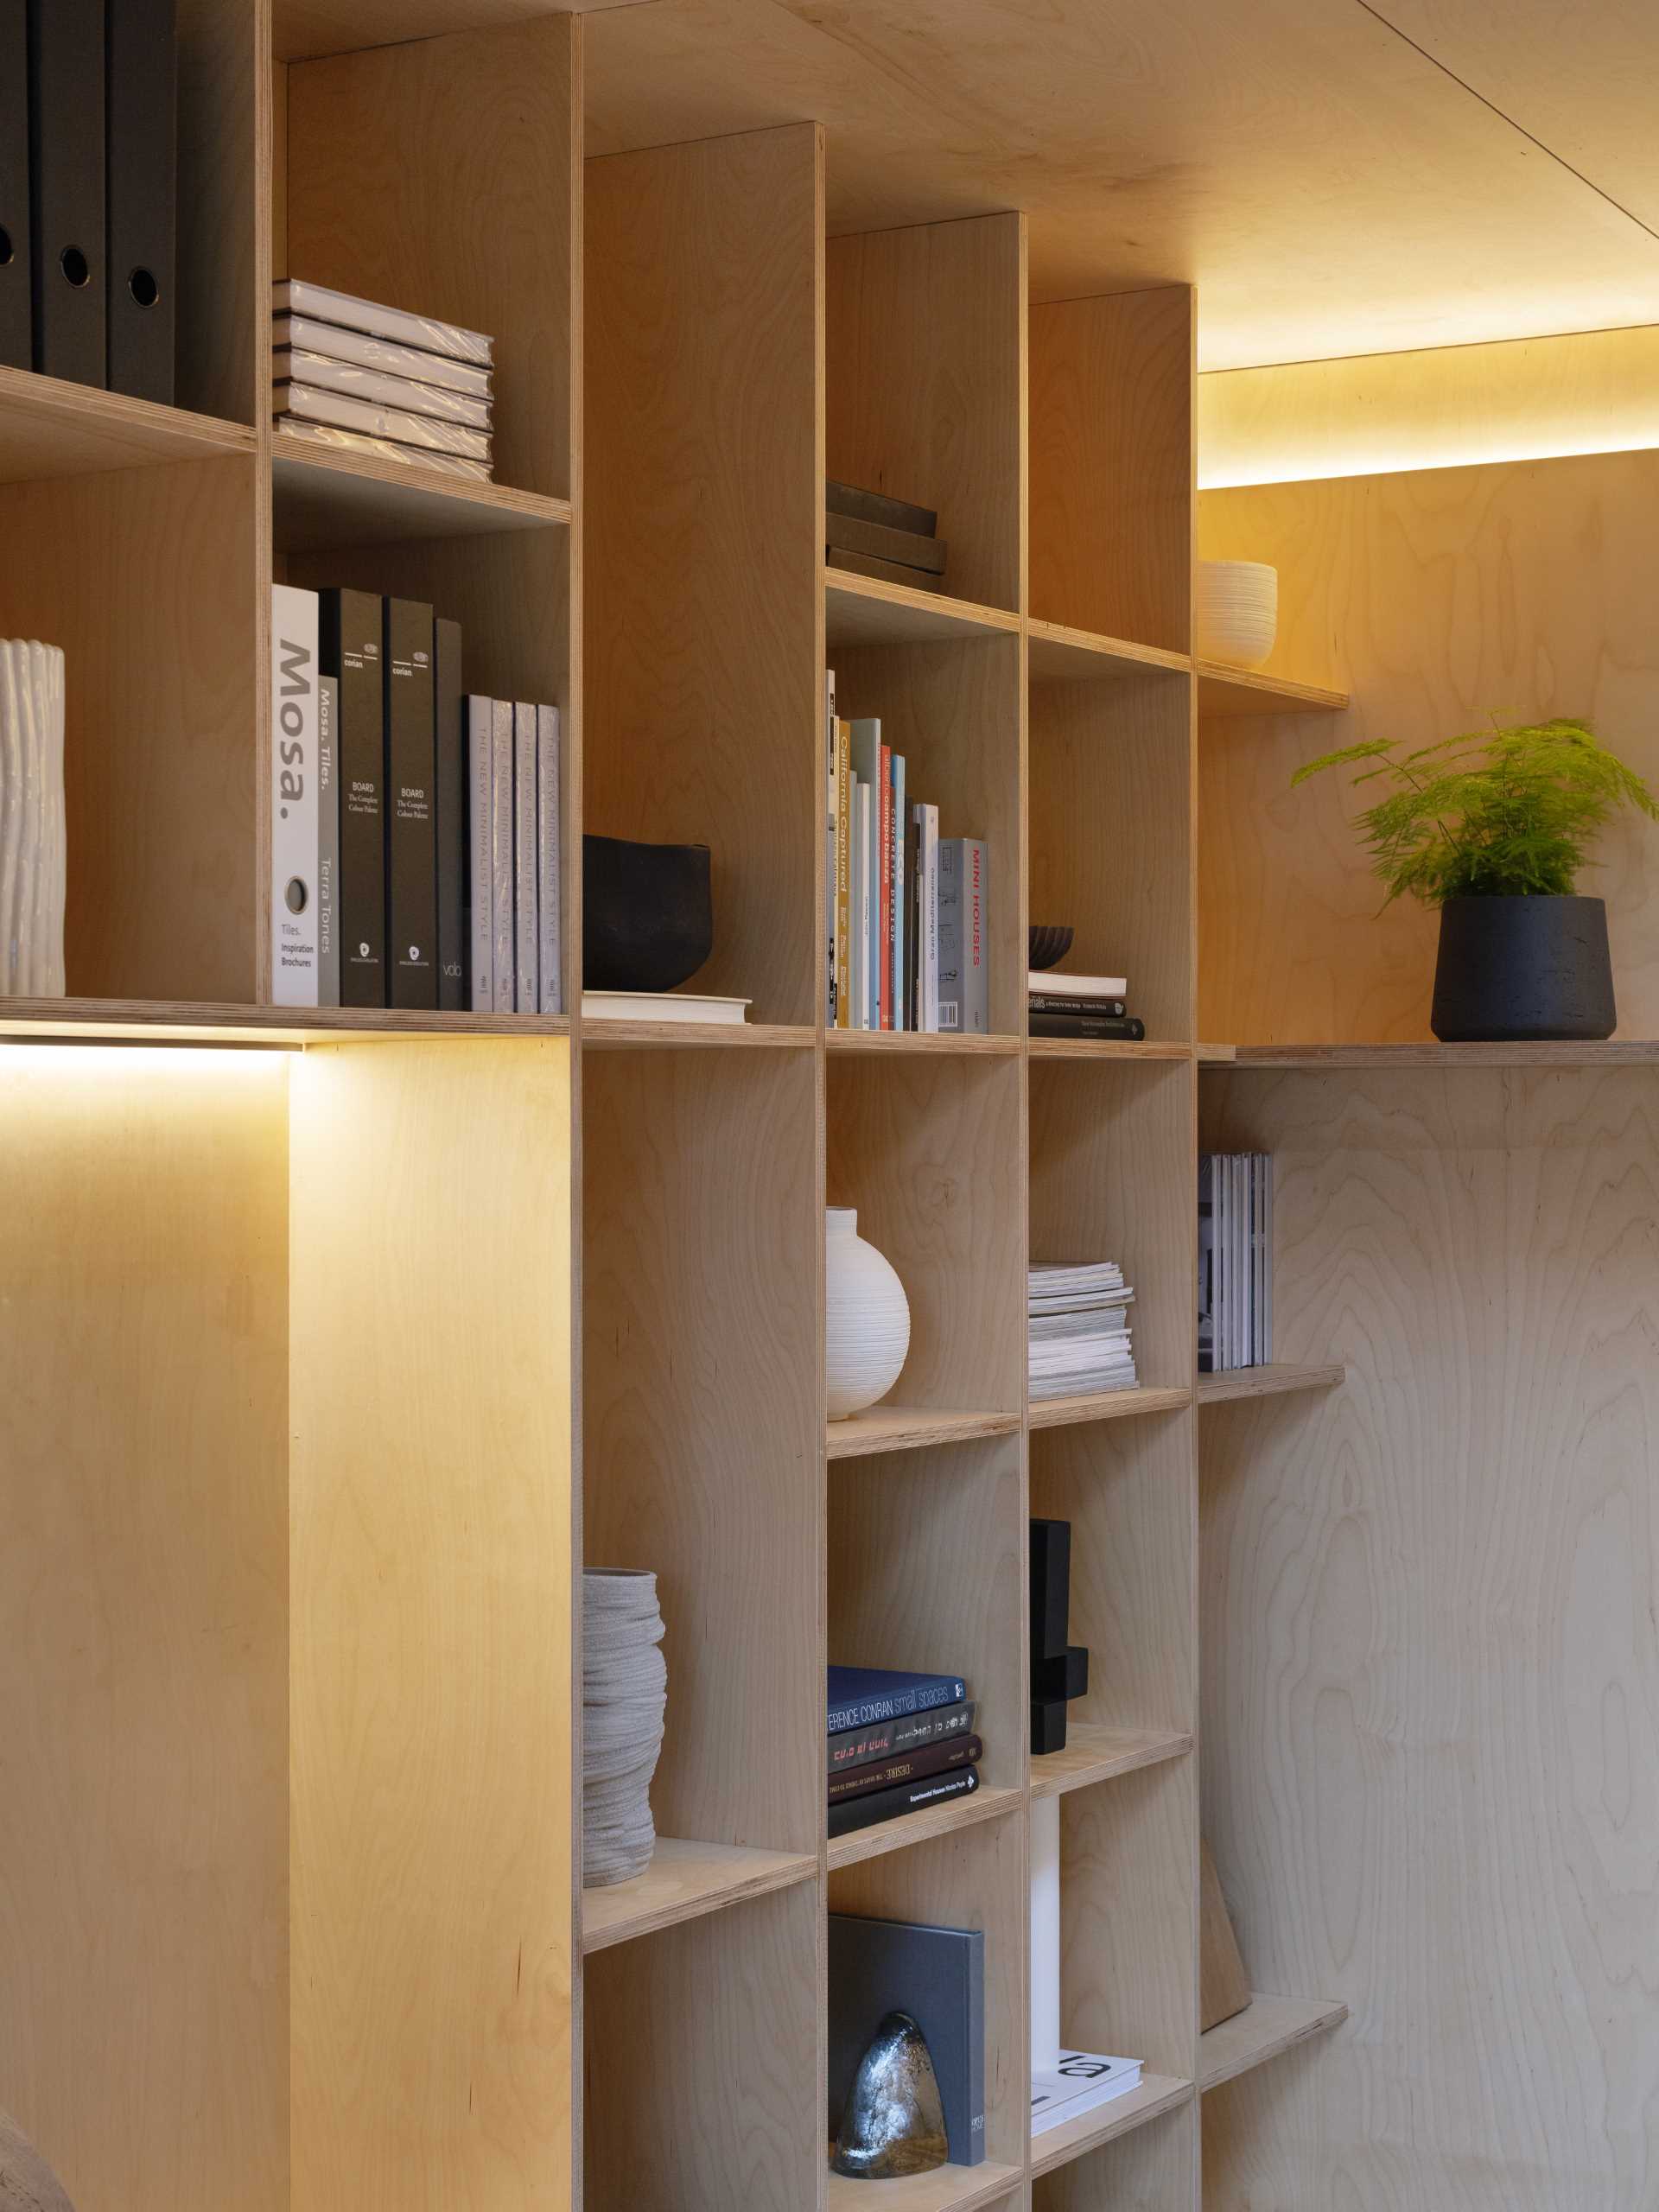 A wall of plywood bookshelves and hidden lighting.